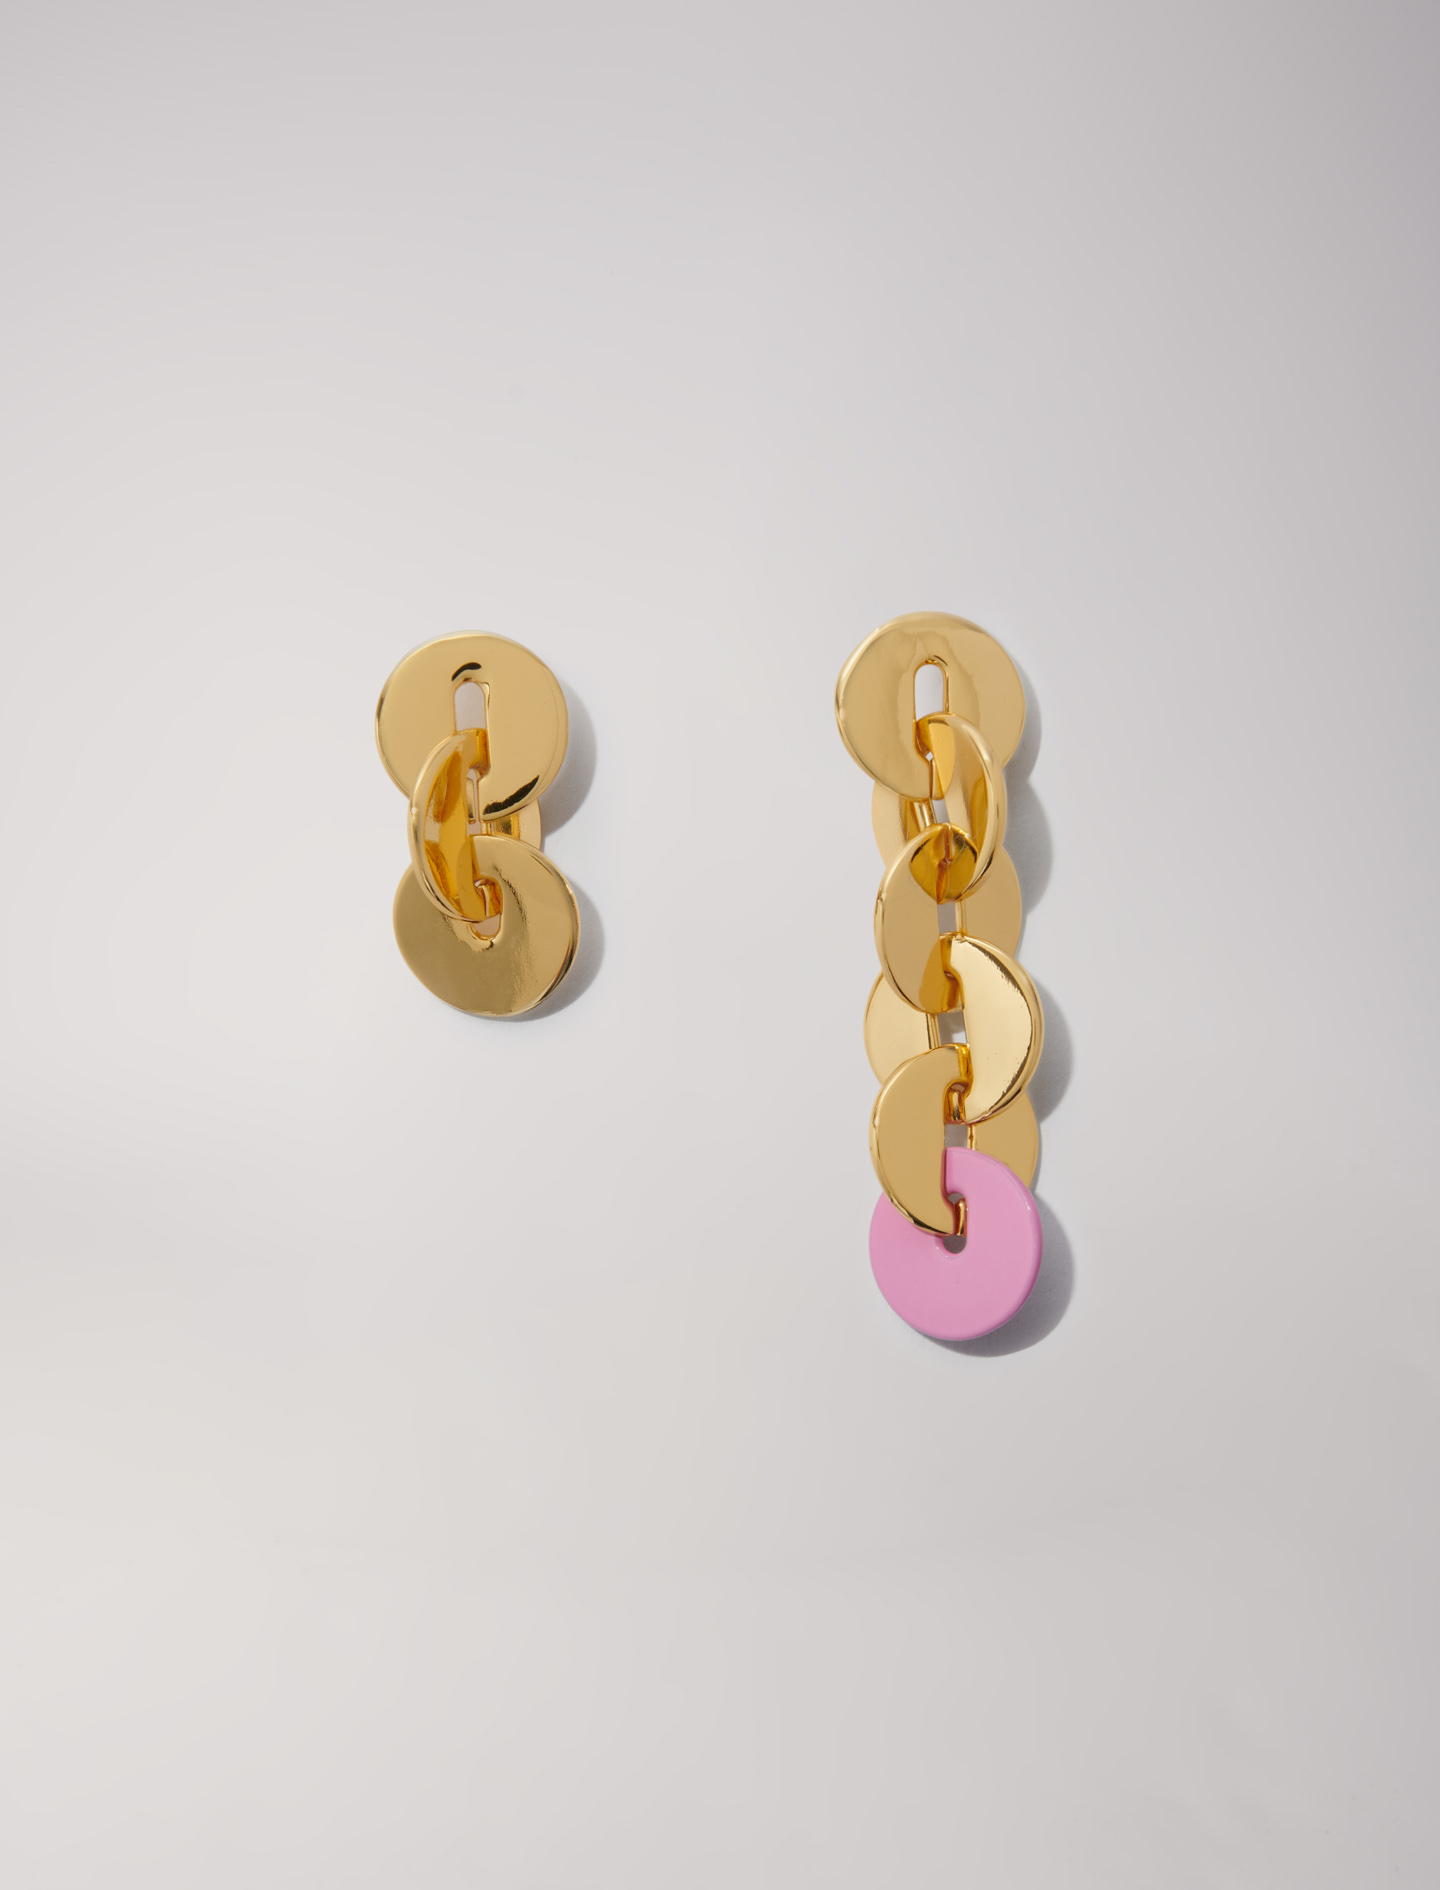 Maje Woman's resin Jewellery: Enameled earrings for Spring/Summer, in color Gold / Yellow